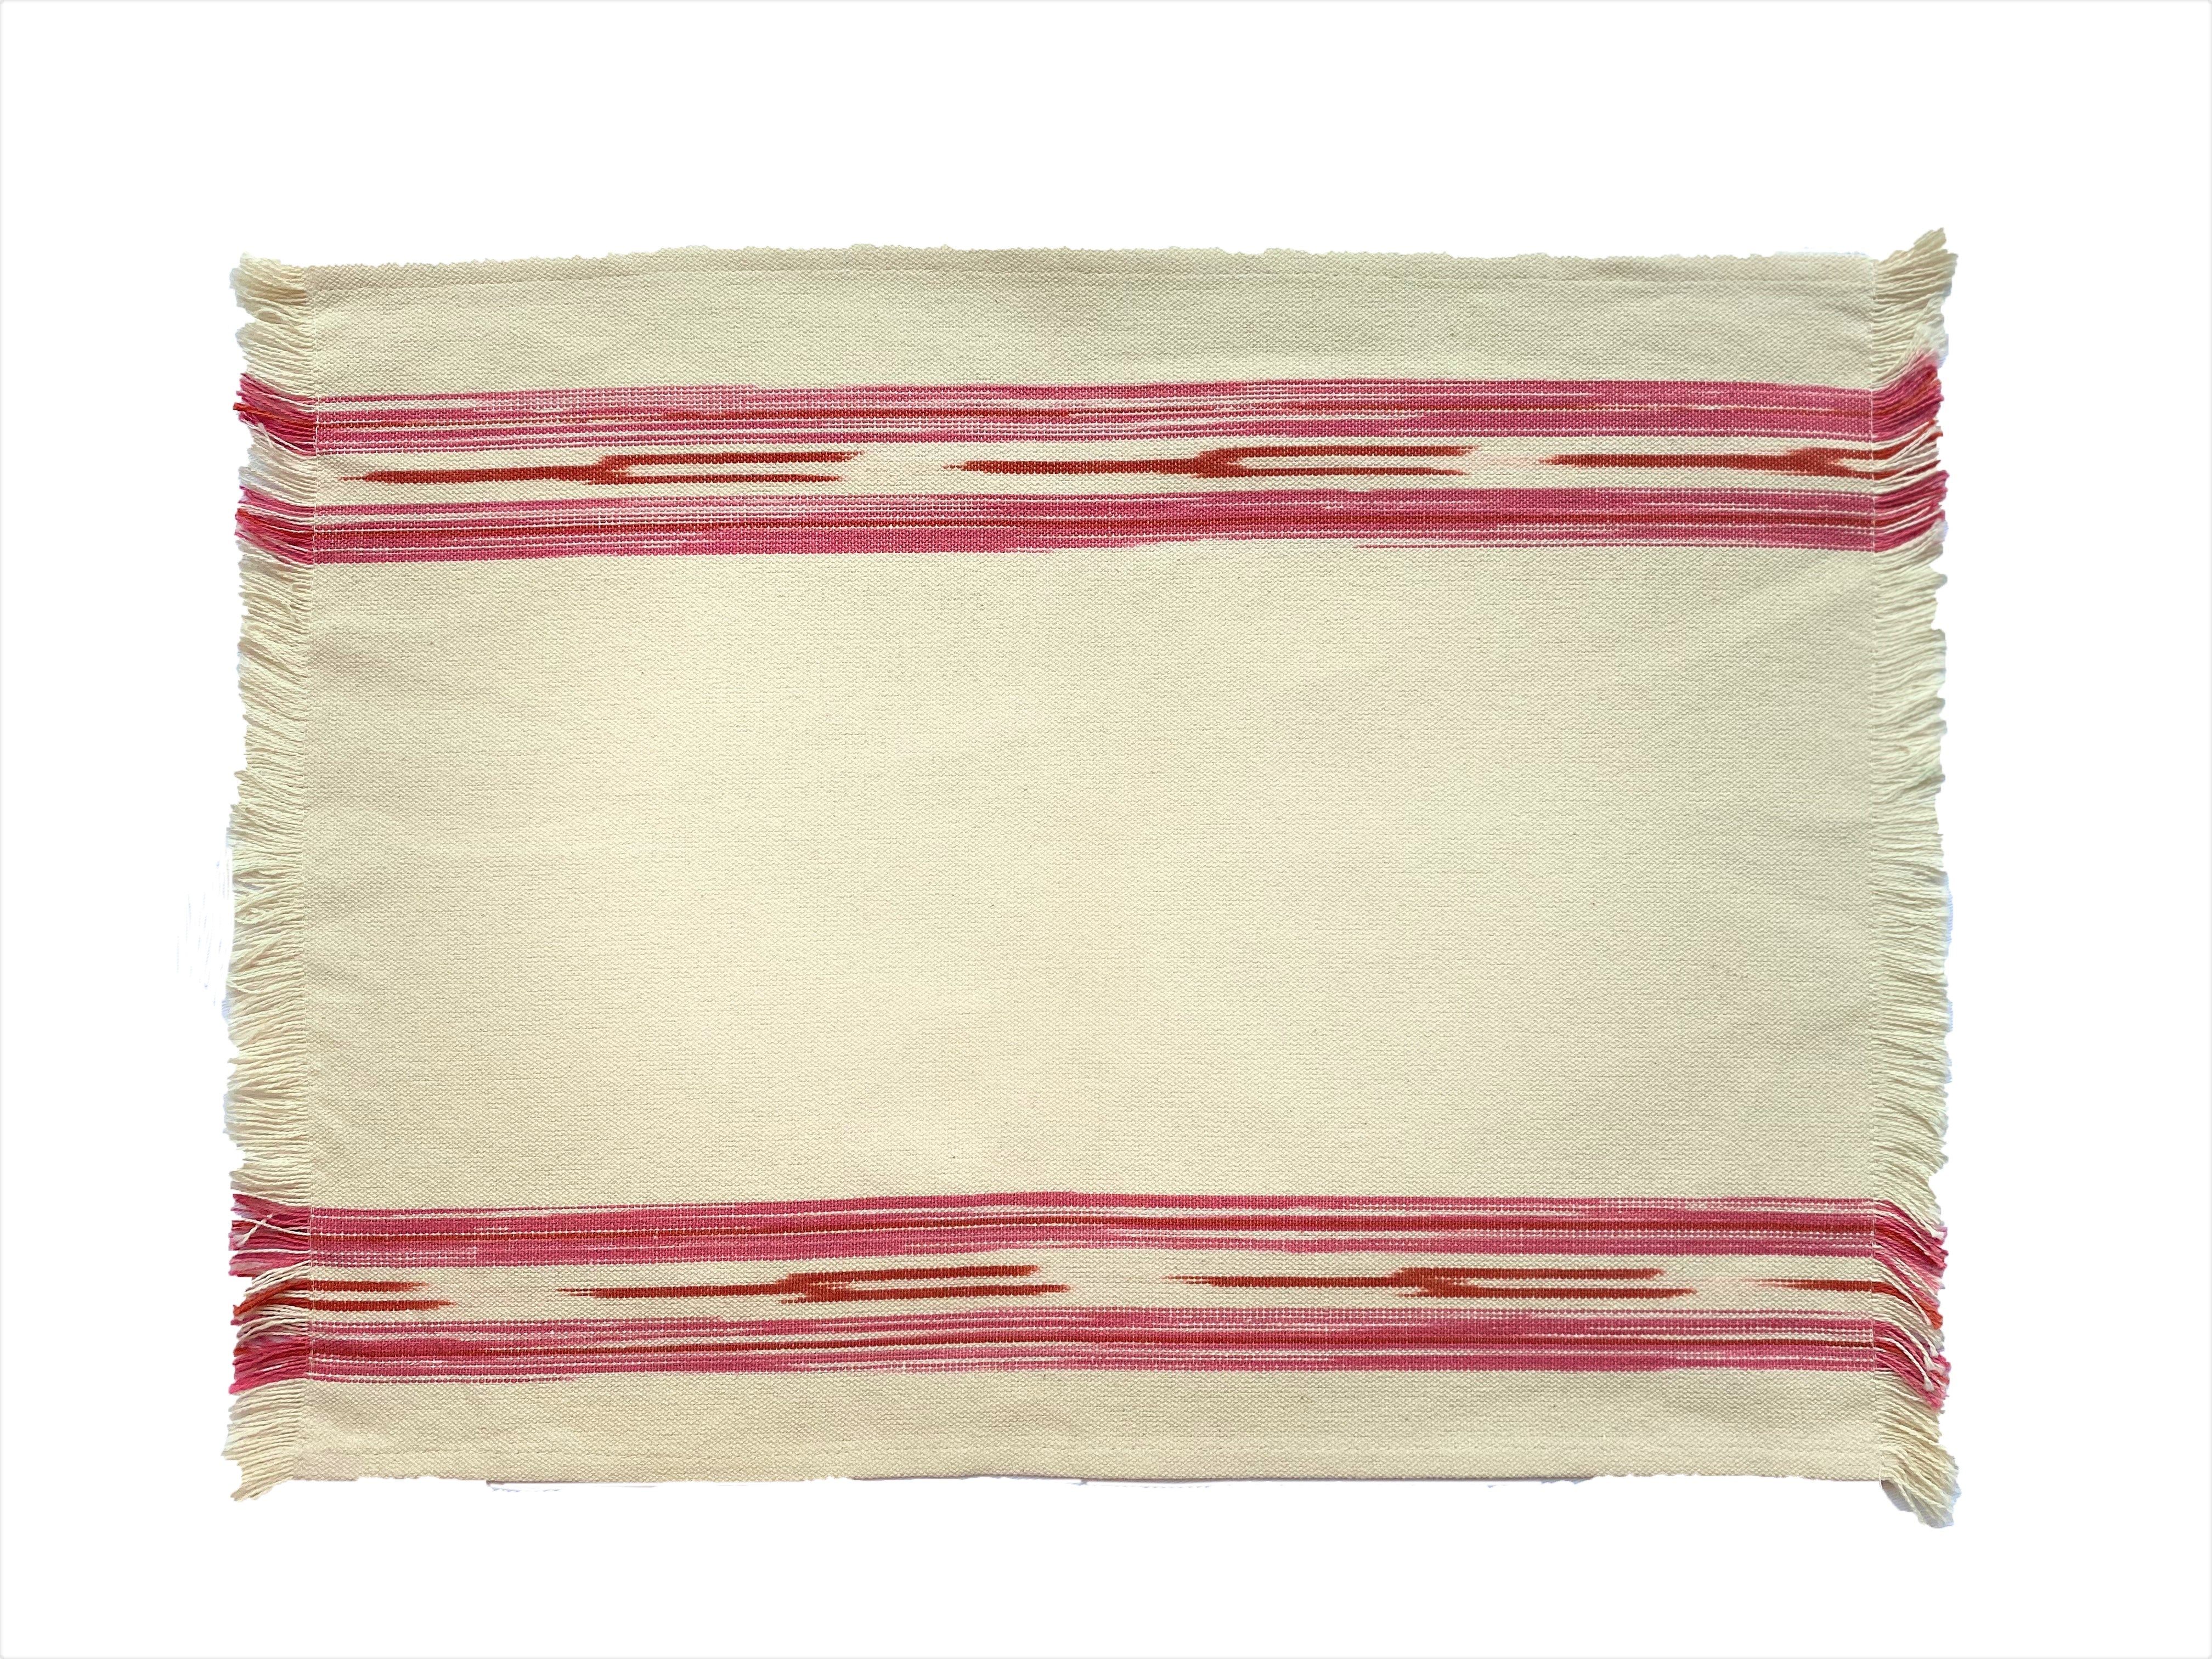 FABRIC PLACEMAT - CREAM WITH PINK IKAT STRIPE